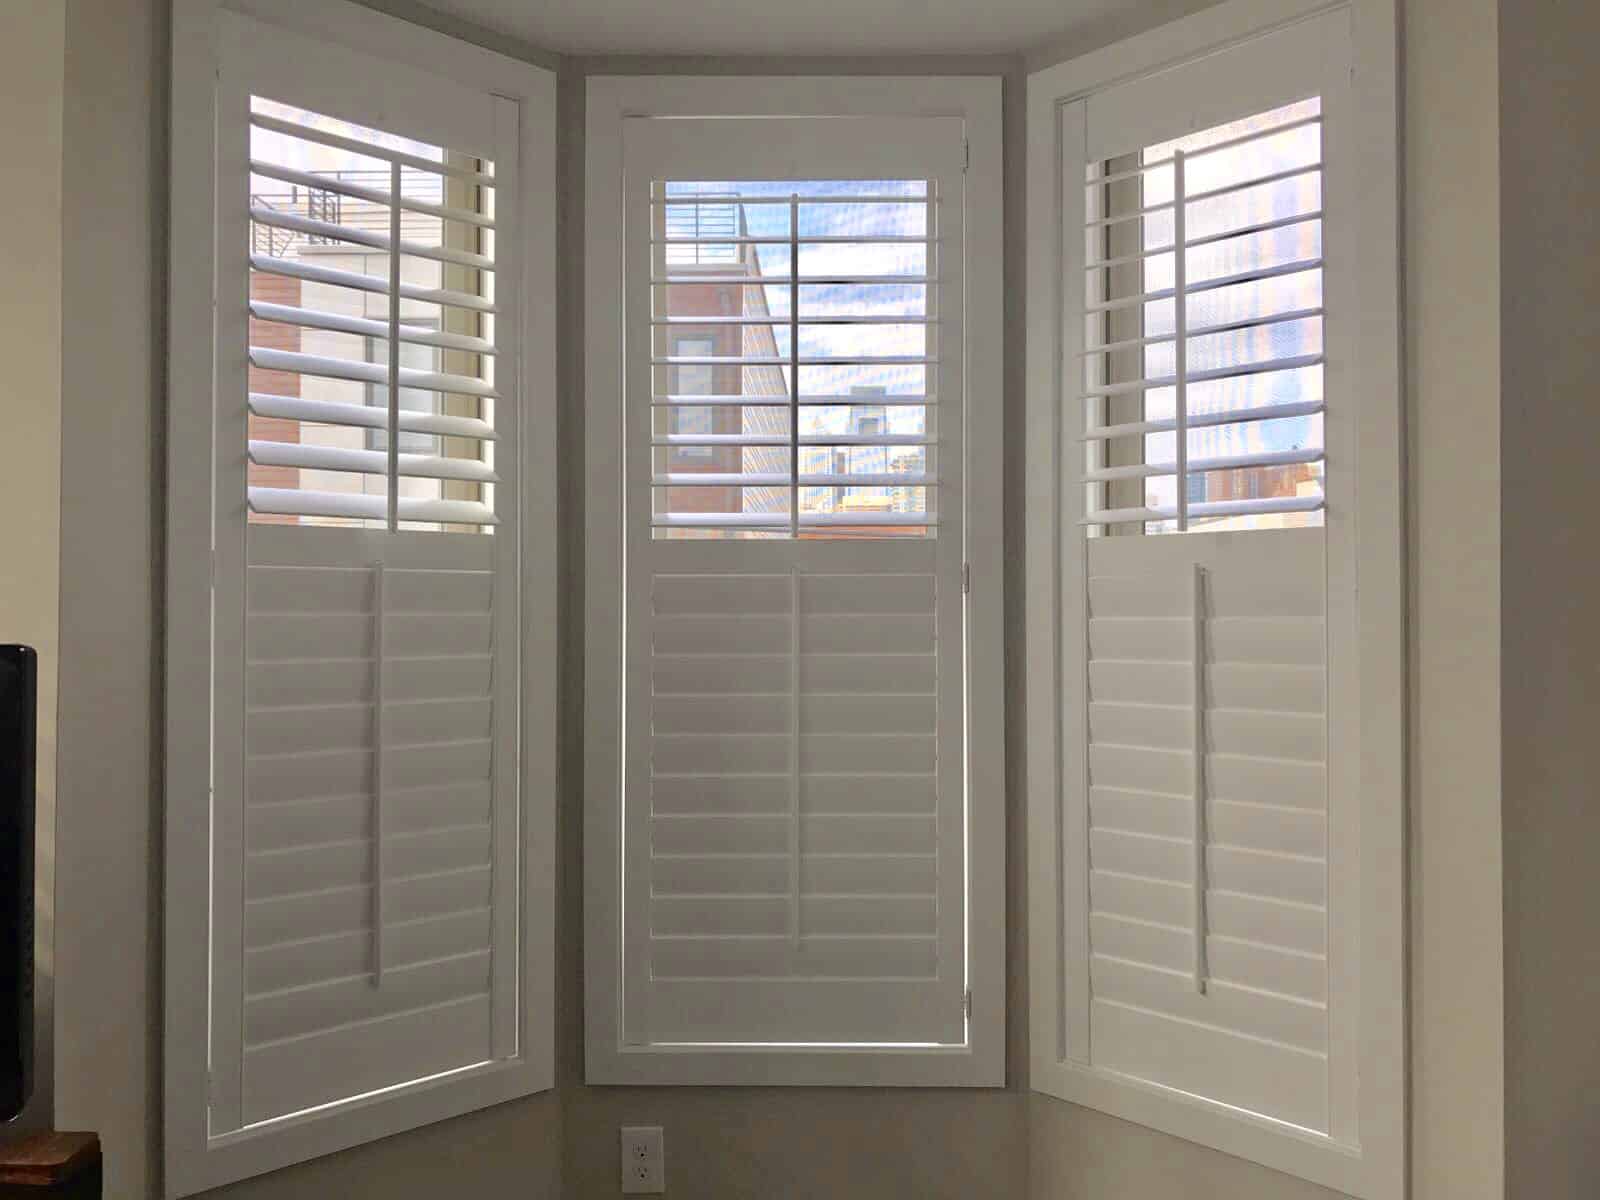 An Ultimate Guide On Buying Plantation Shutters